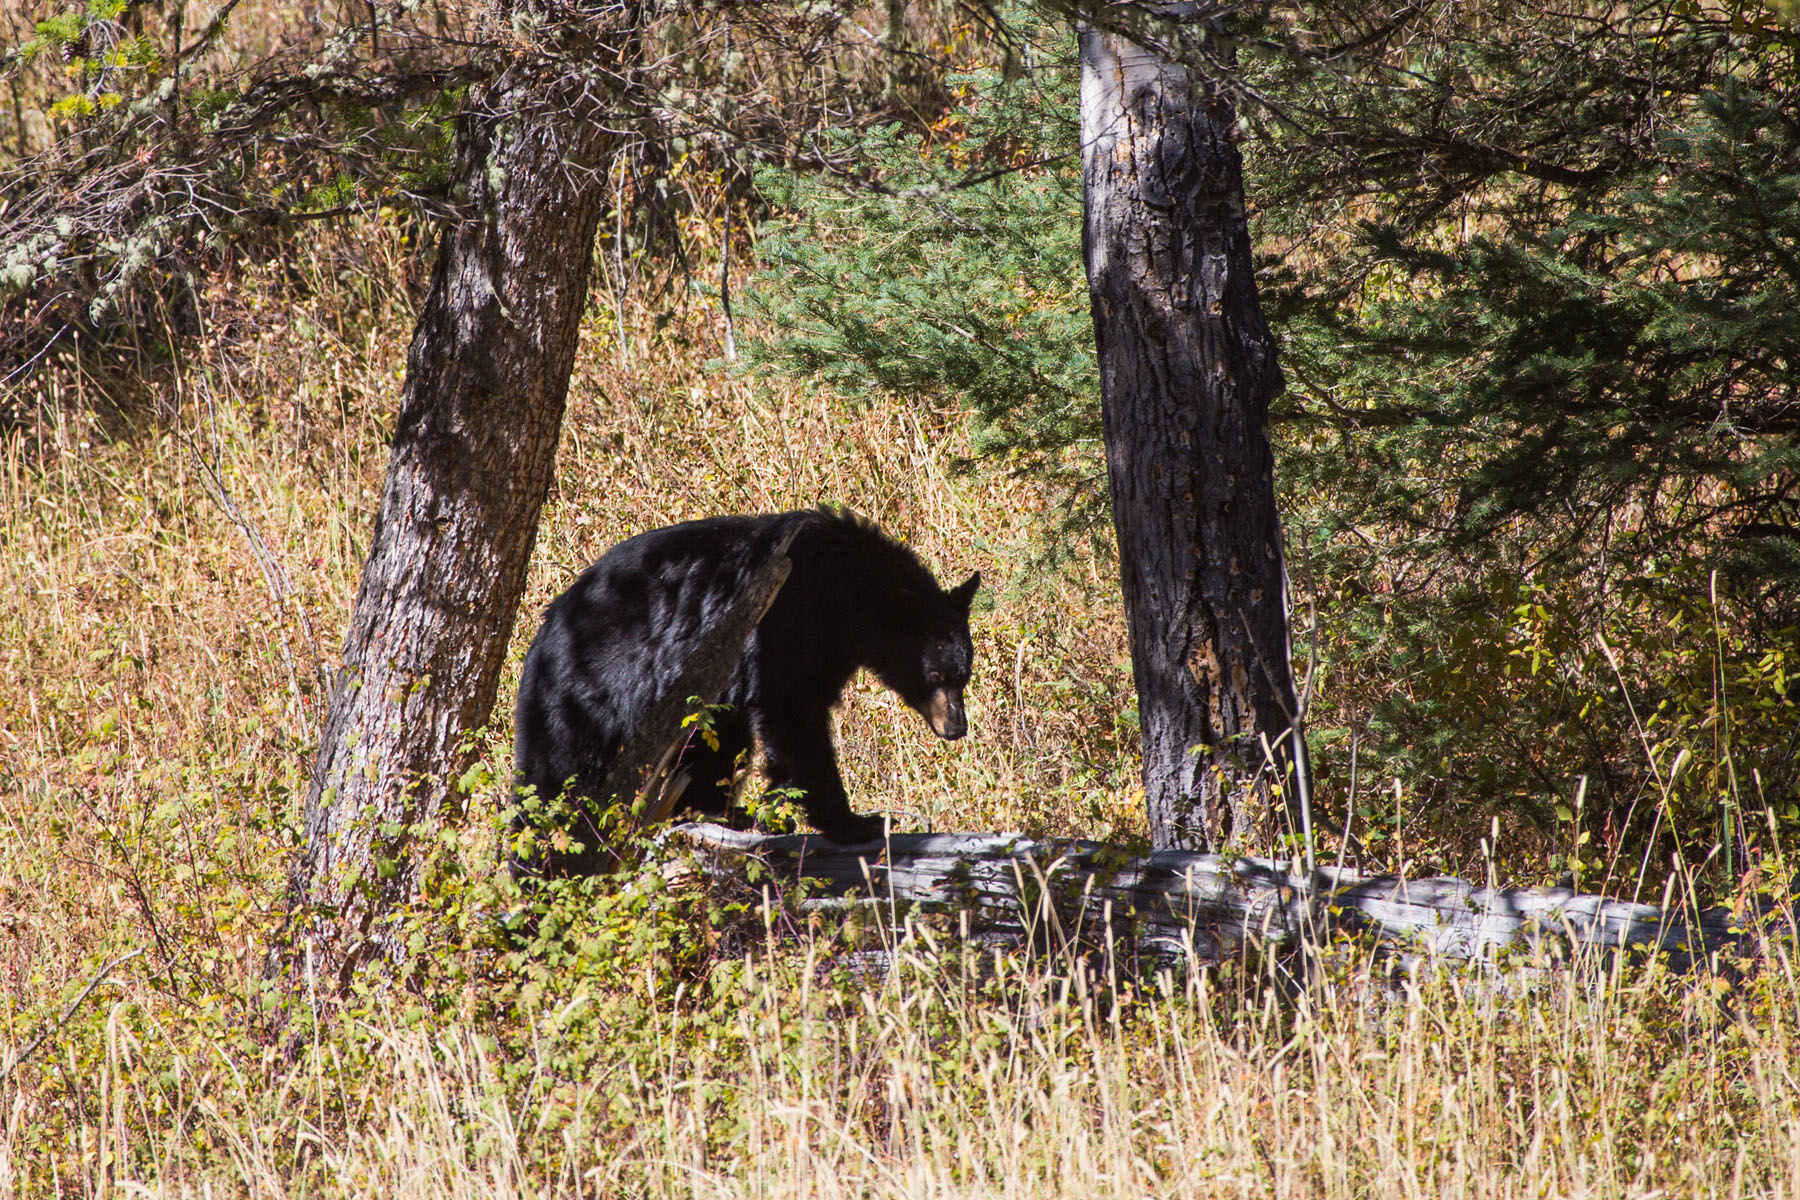 Black bear in Lamar Valley, Yellowstone National Park, September 2020.  Click for next photo.